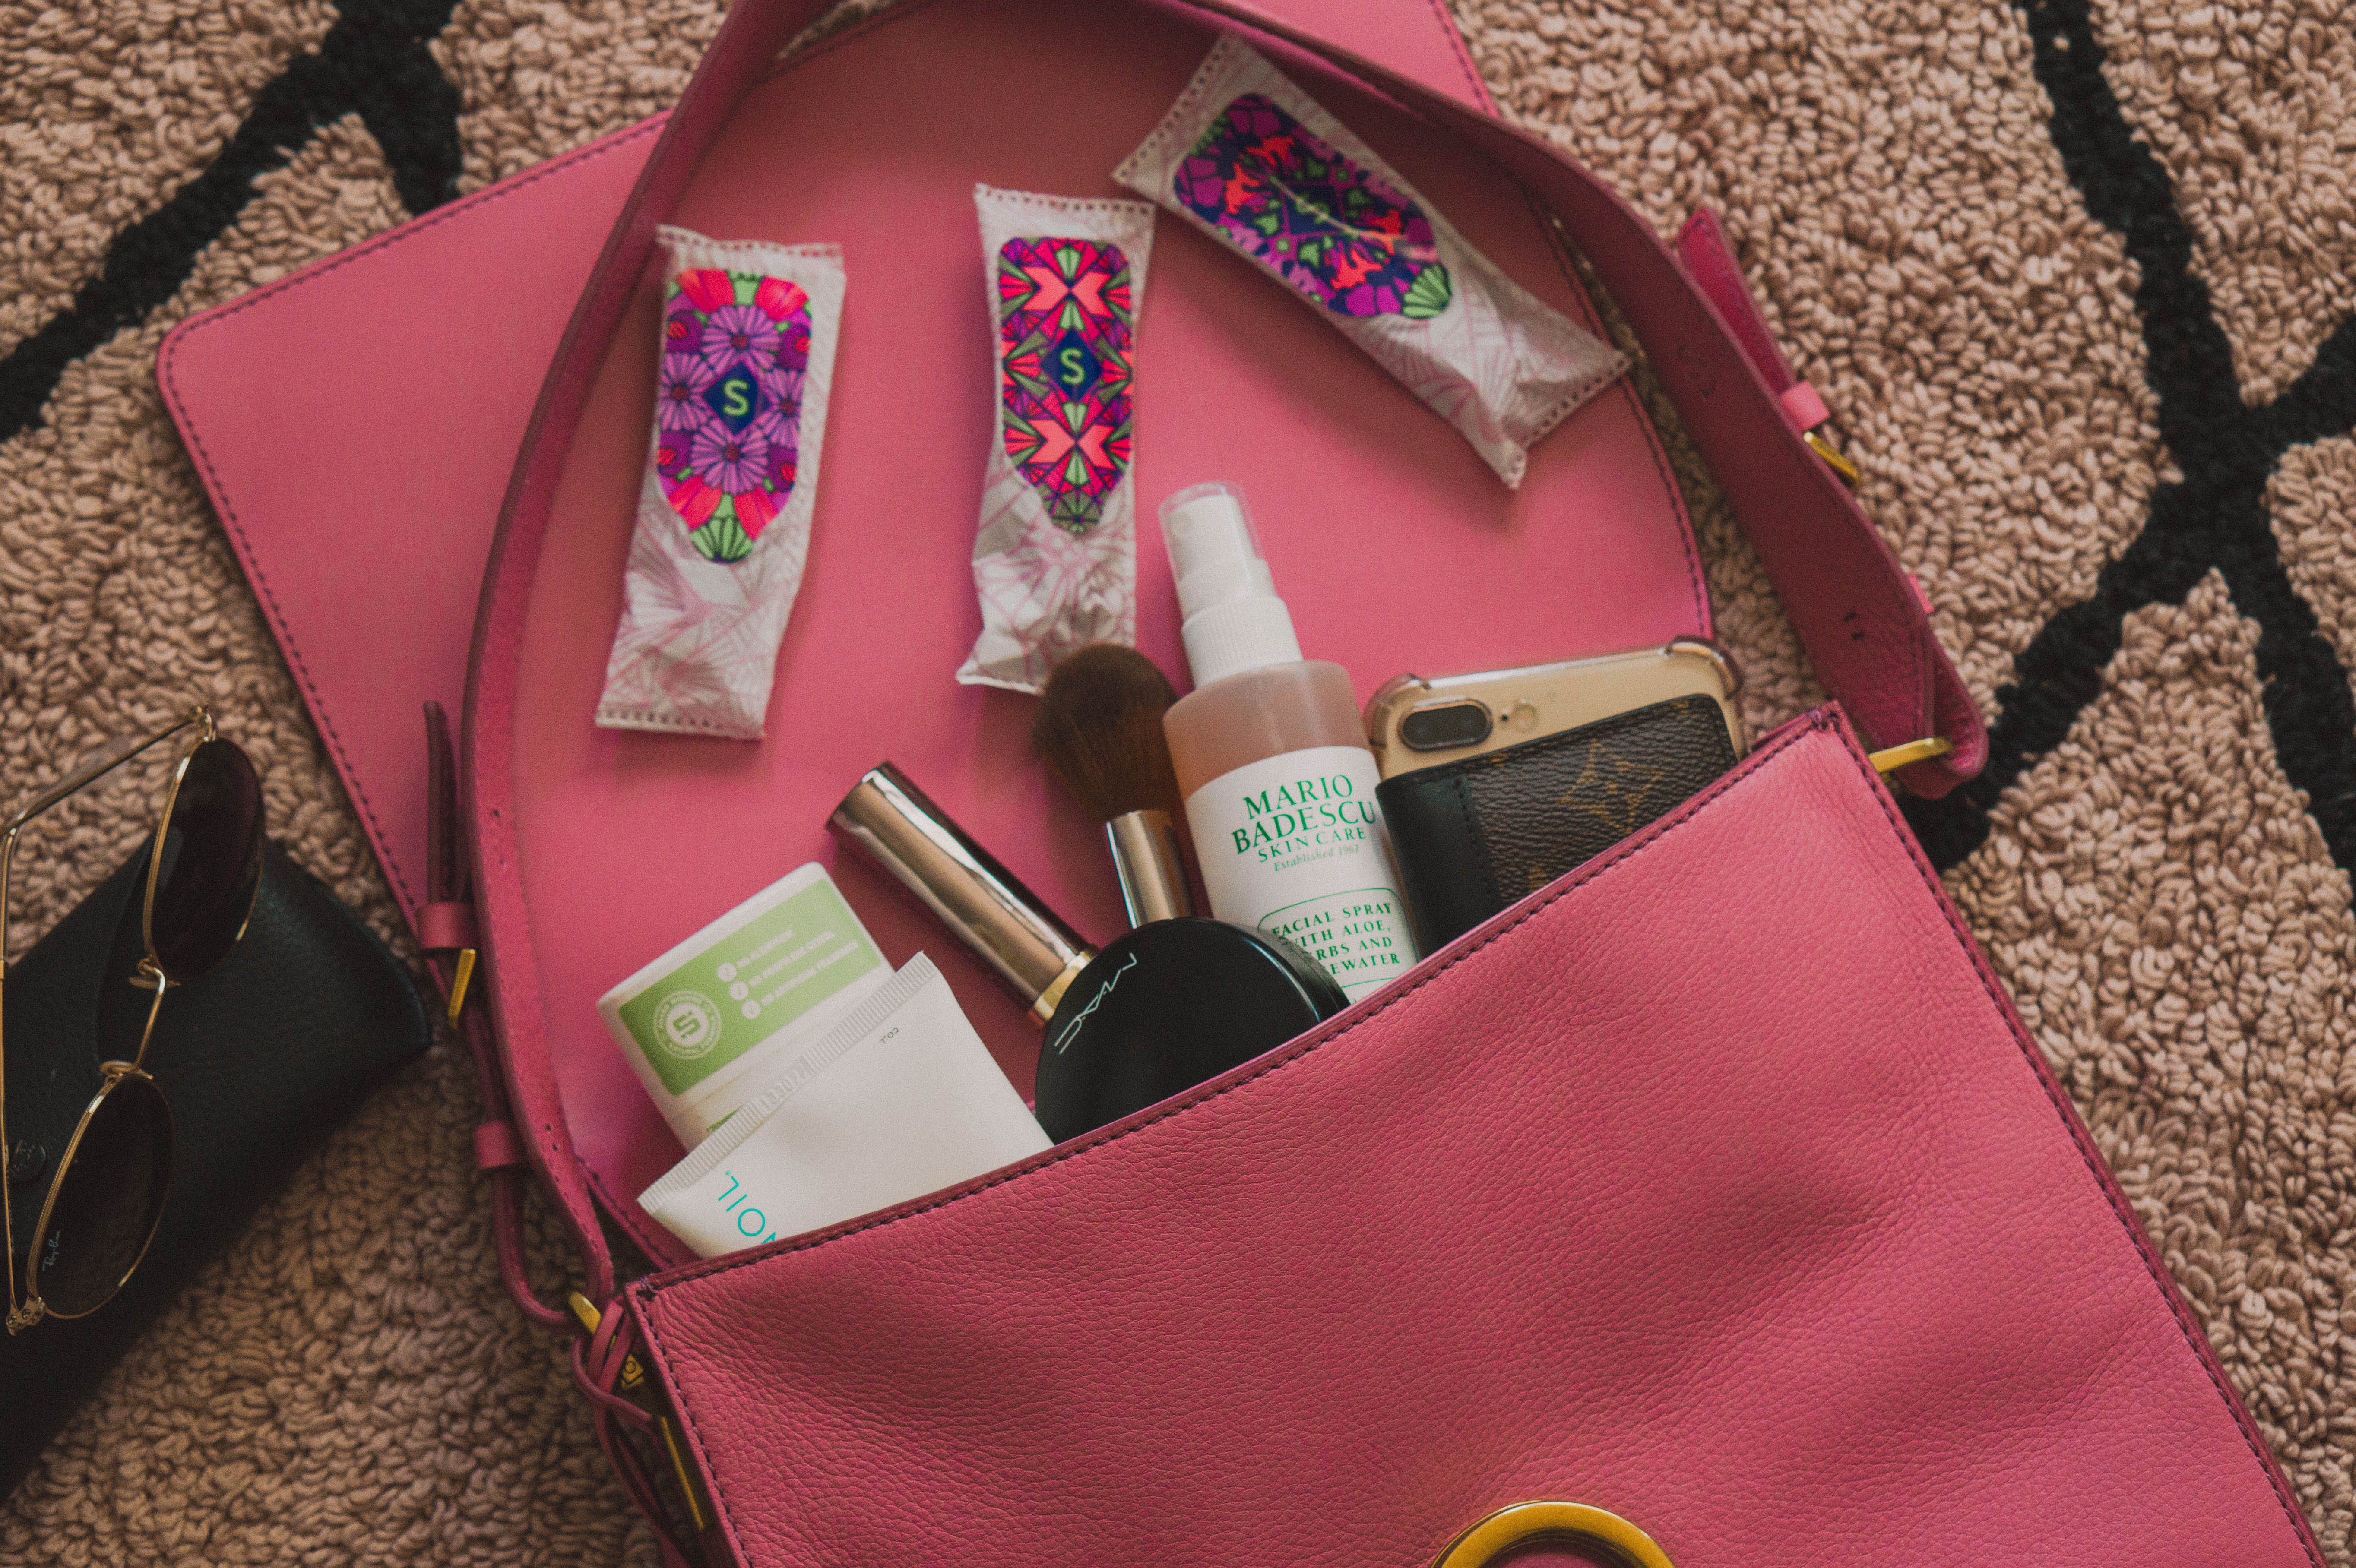 Preppy by the Sea: What's In My Purse?